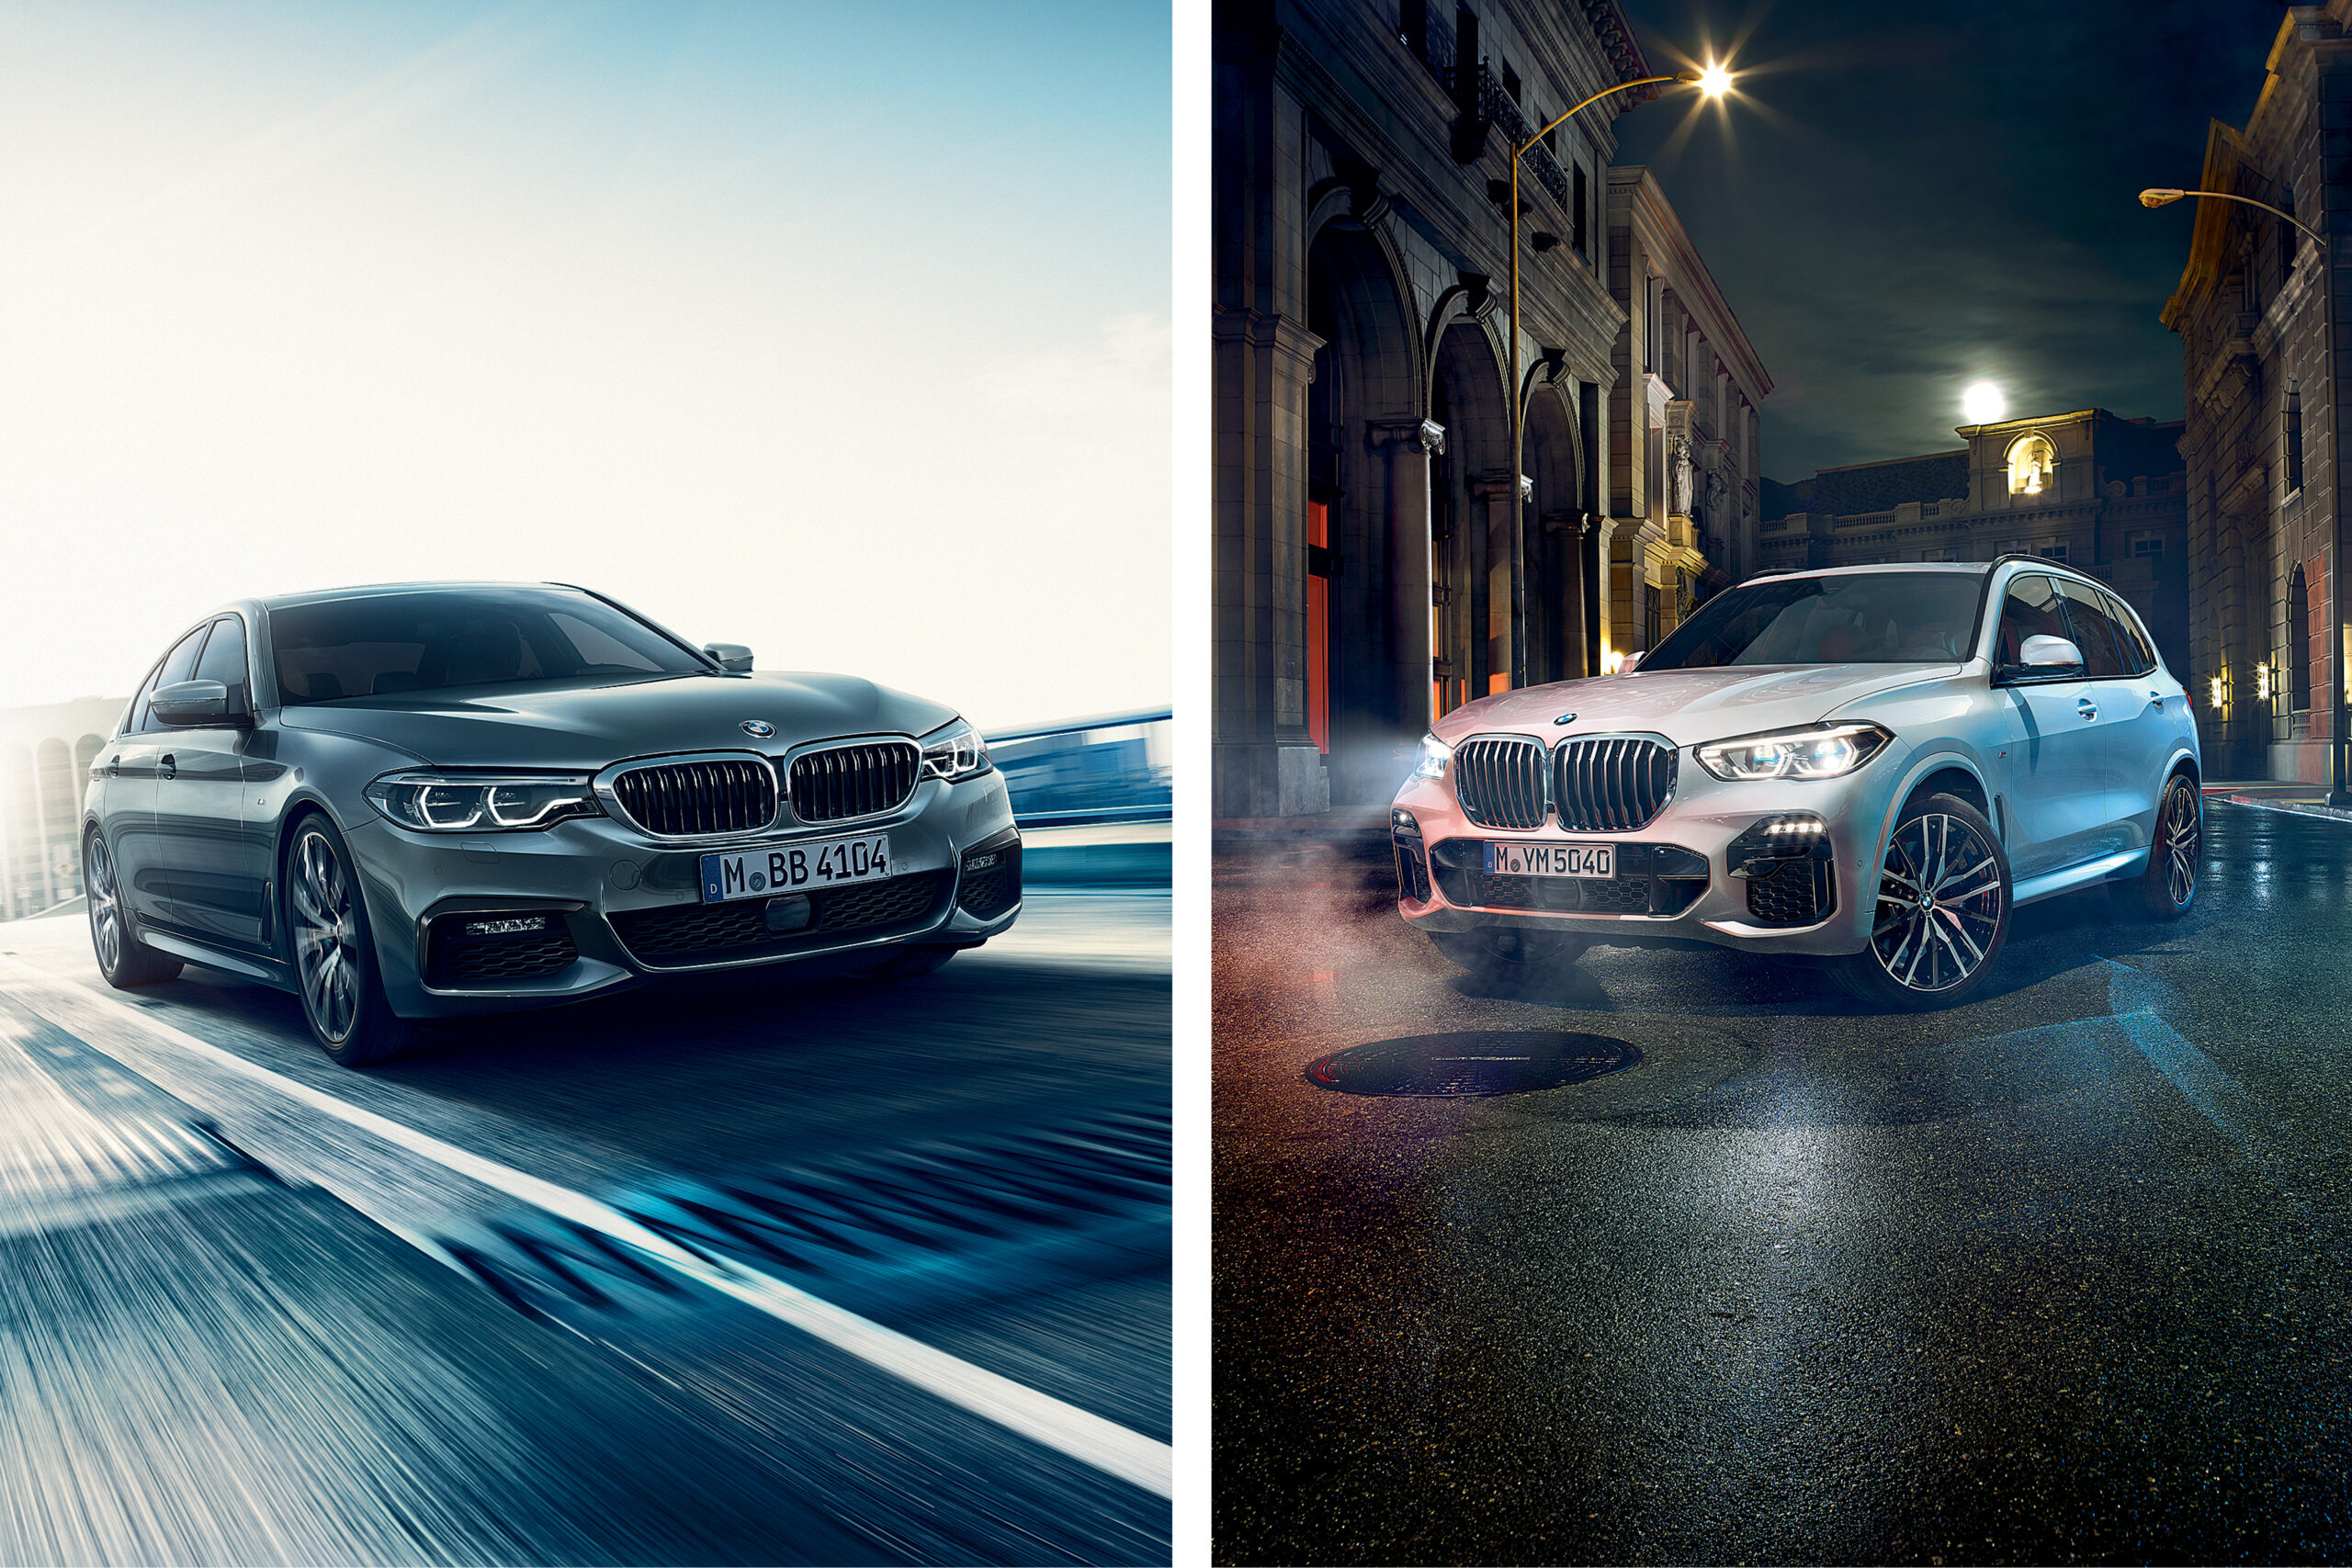 2020 BMW X5 and 530e: Definition of Luxury Hybrids